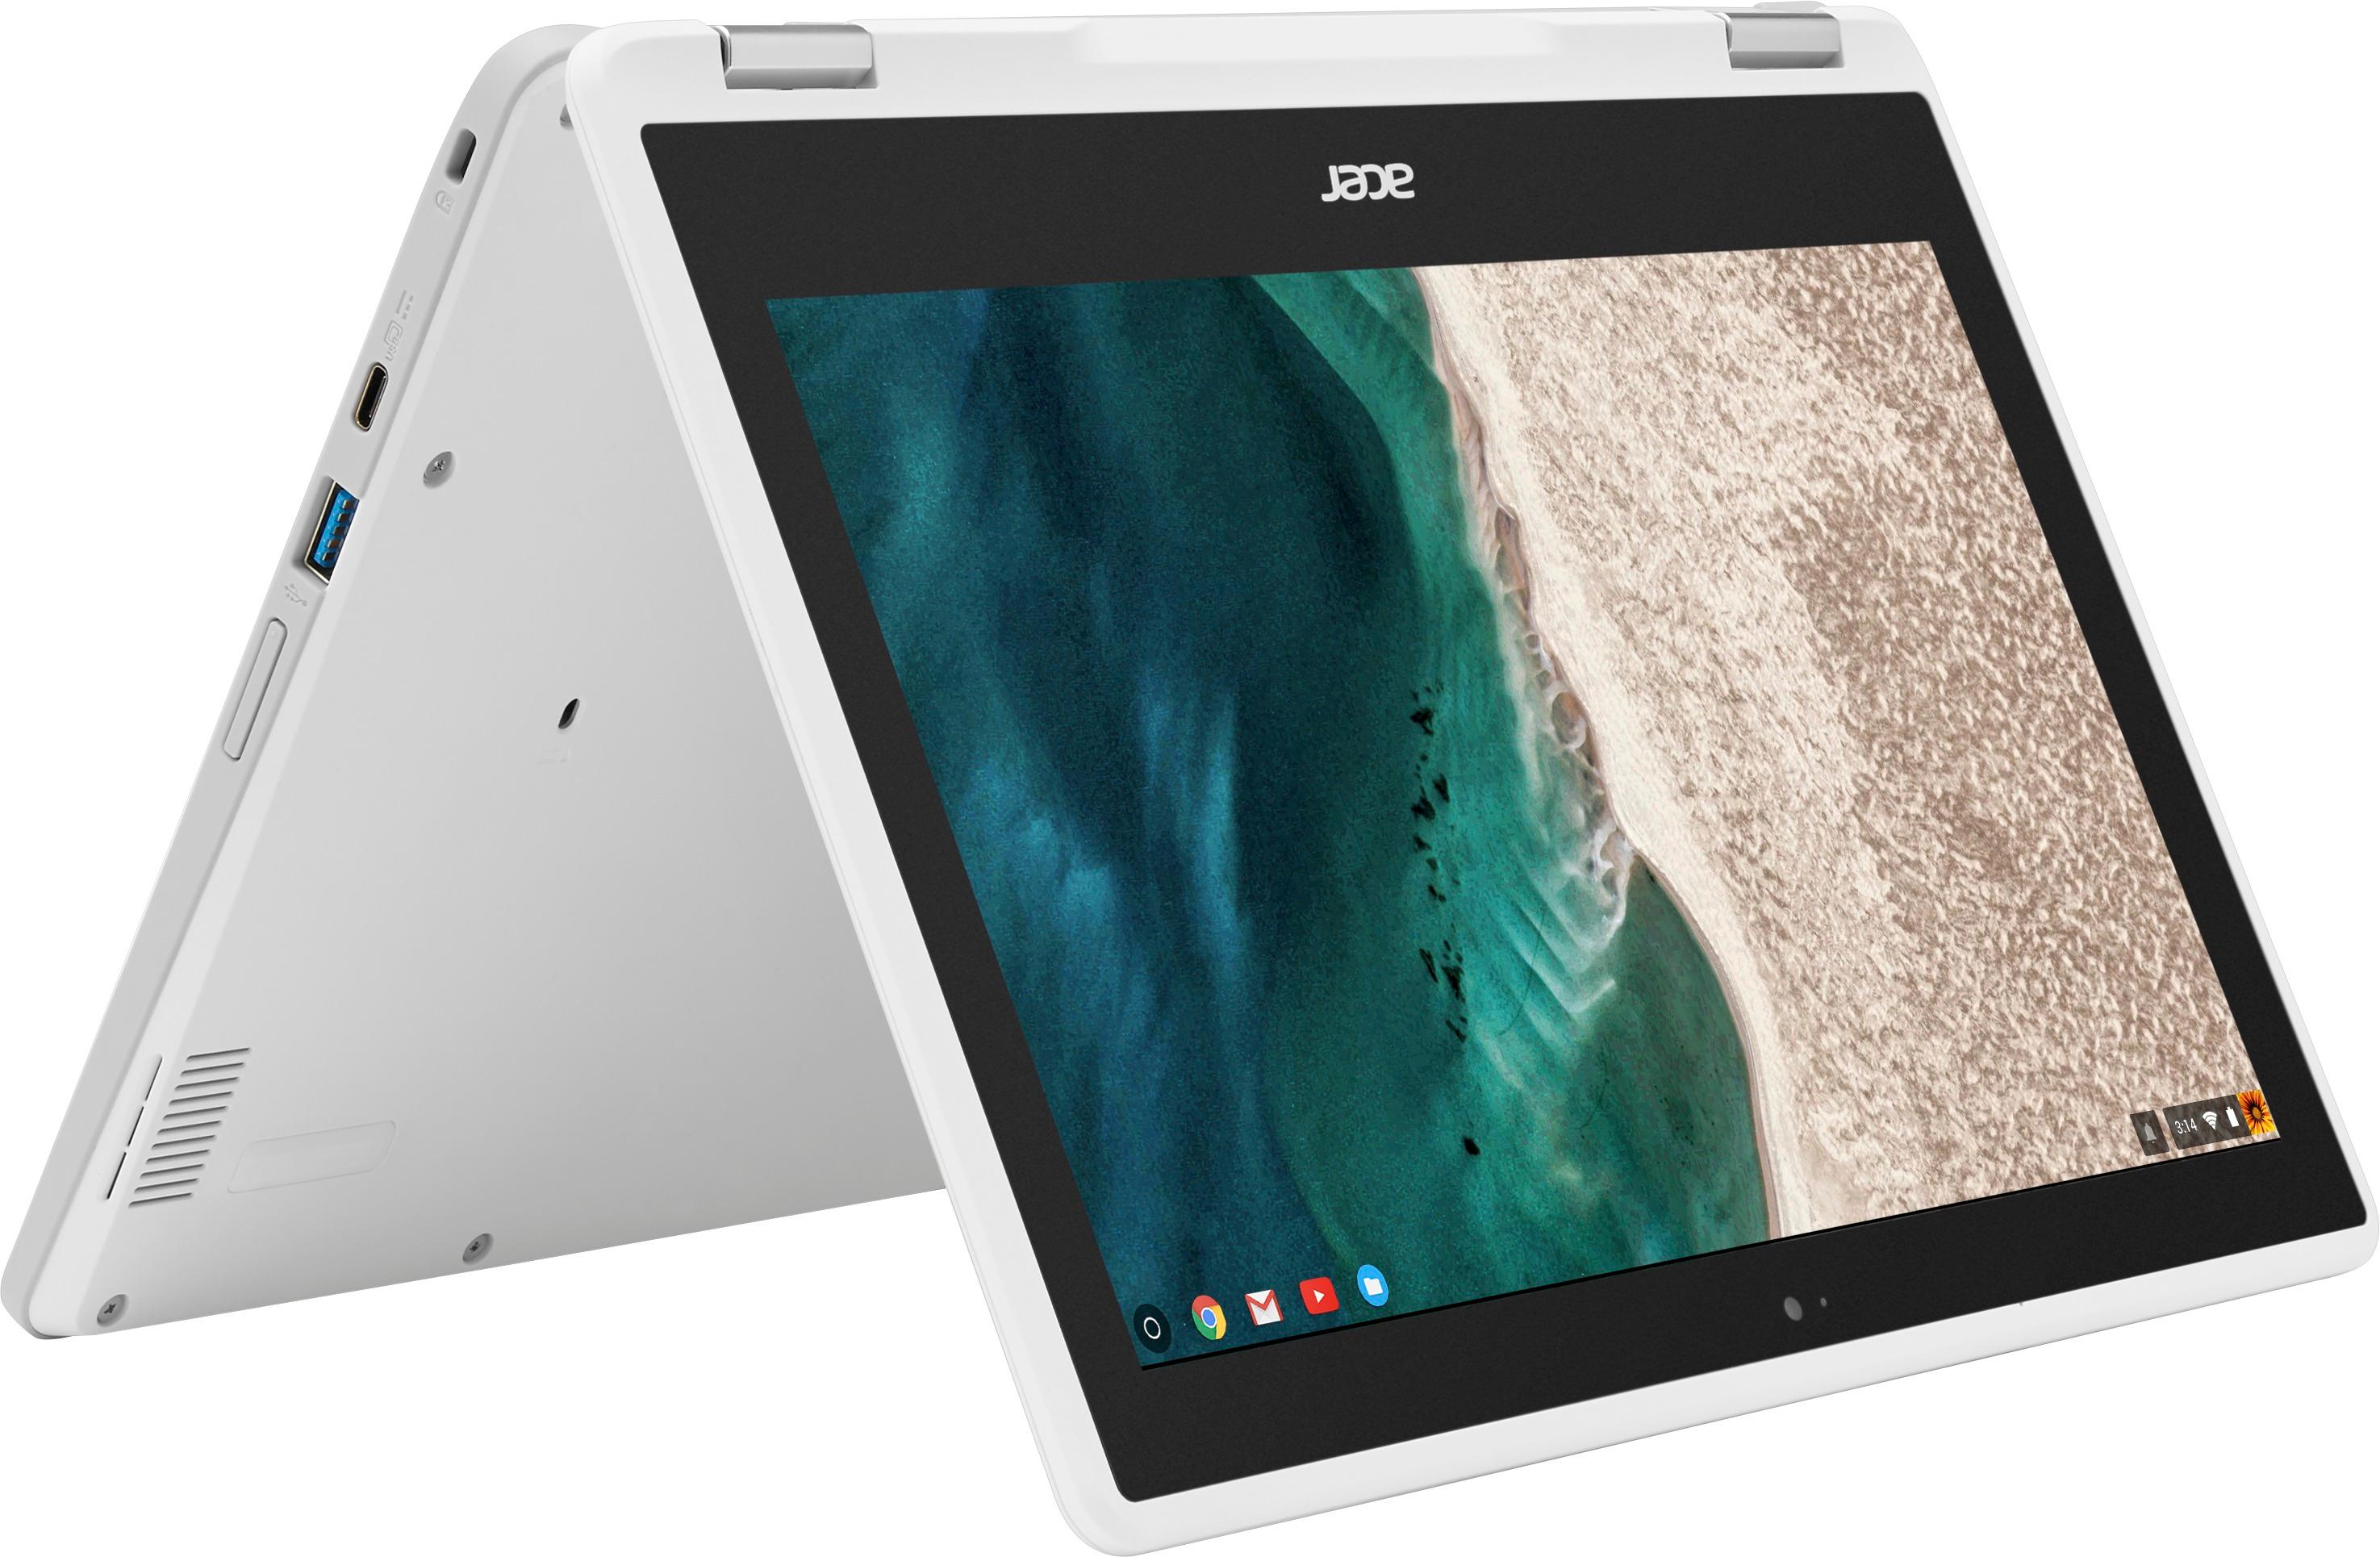 Acer Chromebook R 11 Convertible, 11.6-Inch HD Touch, Intel Celeron N3150, 4GB  DDR3L, 32GB, Chrome, CB5-132T-C1LK by Acer ノートパソコン